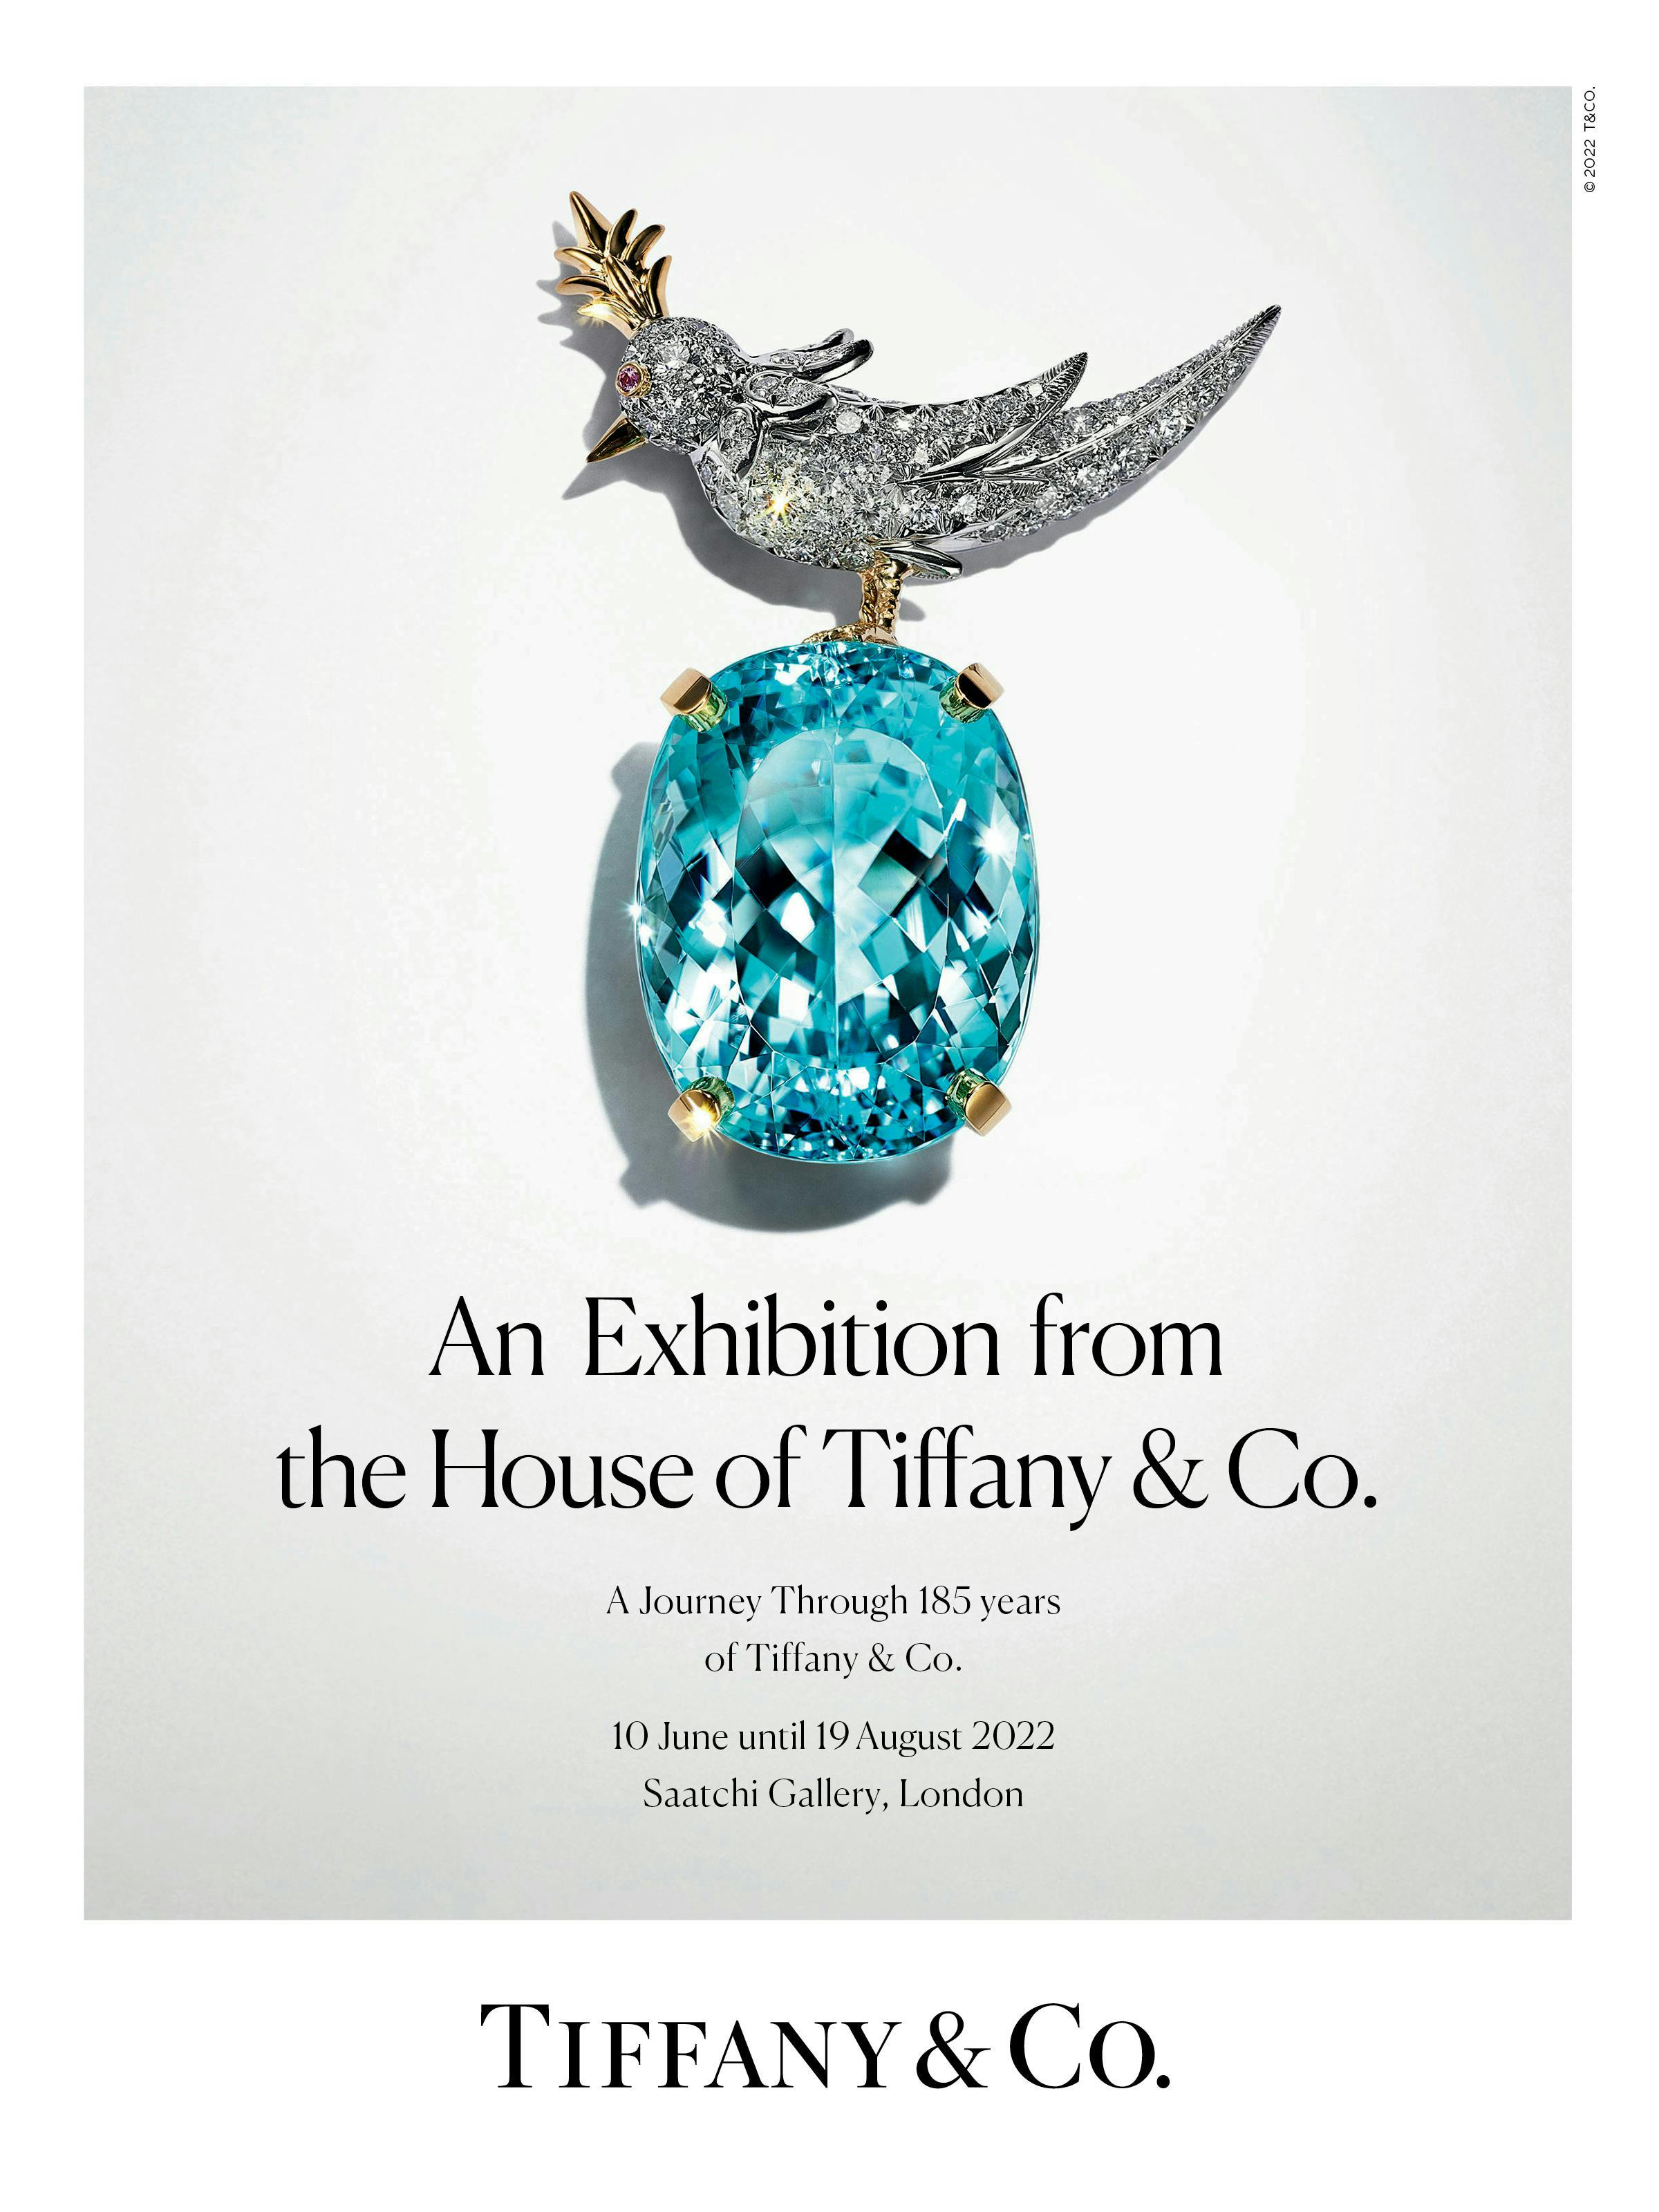 "An Exhibition from the House of Tiffany & Co." "A Journey Through 185 years of Tiffany & Co. 10 June until 19 August 2022. Saatchi Gallery, London." A big blue diamond is attached to a silver diamond board with gold detailing. 